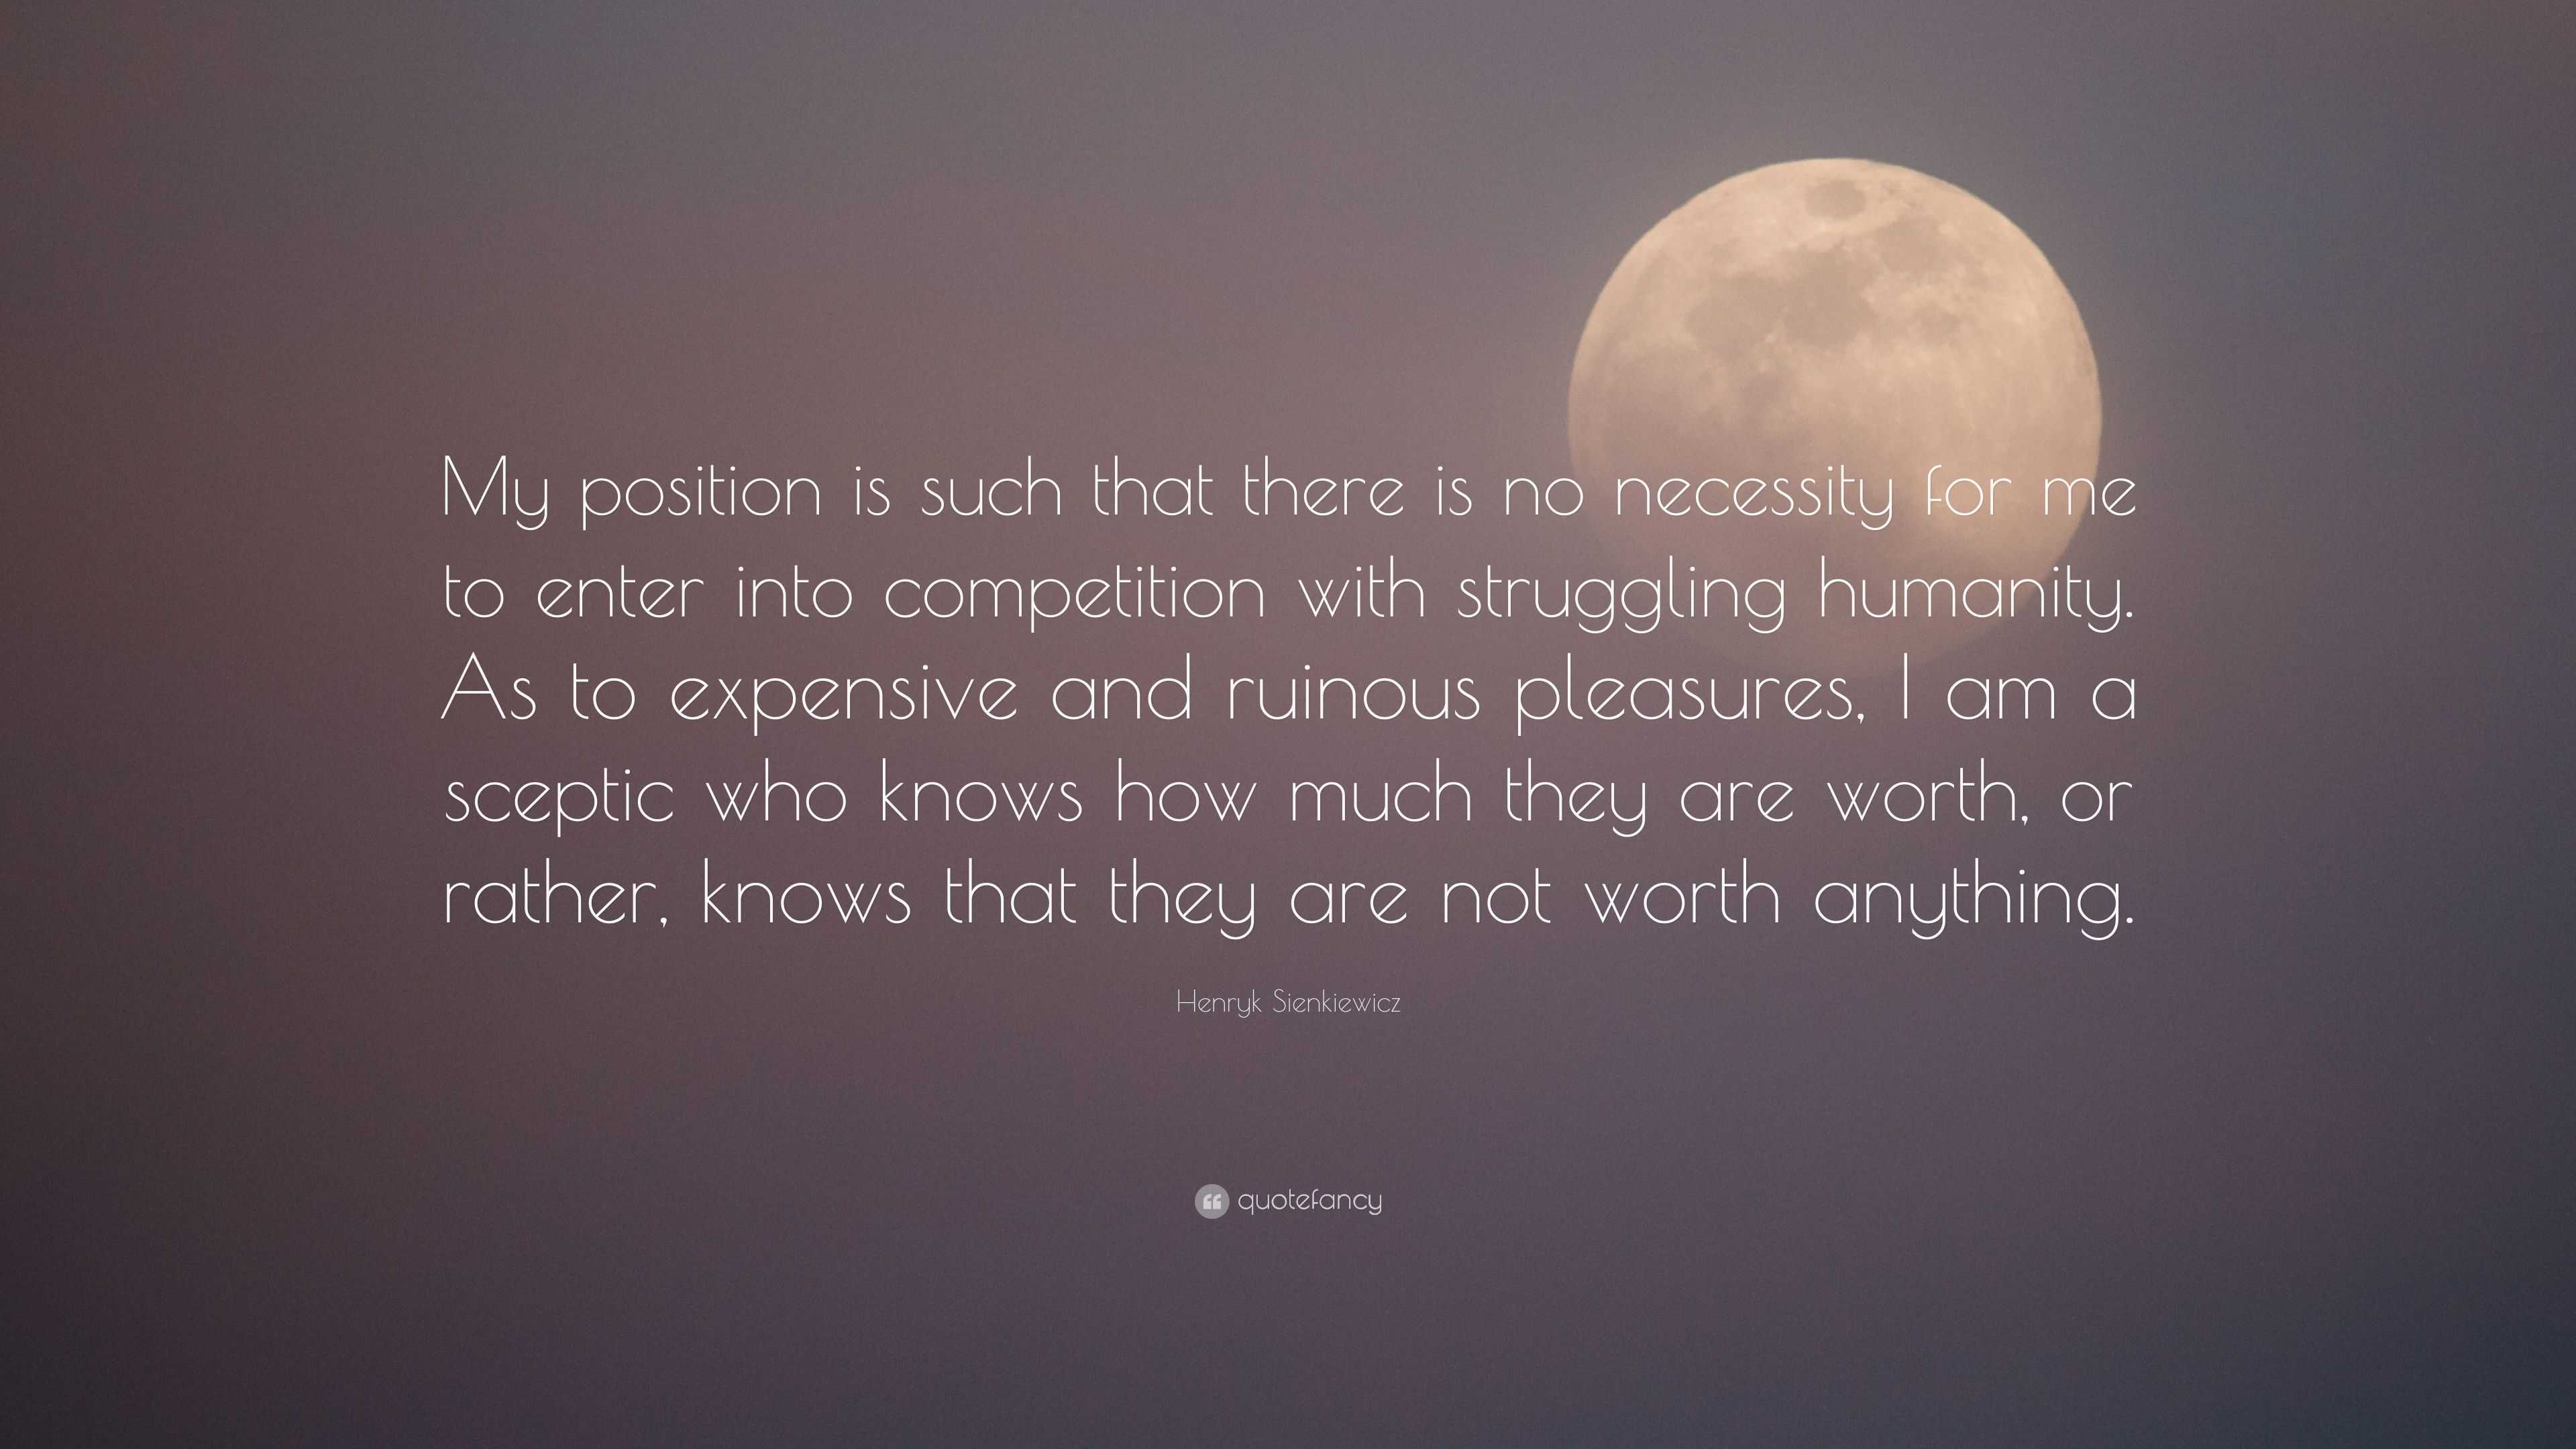 Henryk Sienkiewicz Quote: “My position is such that there is no